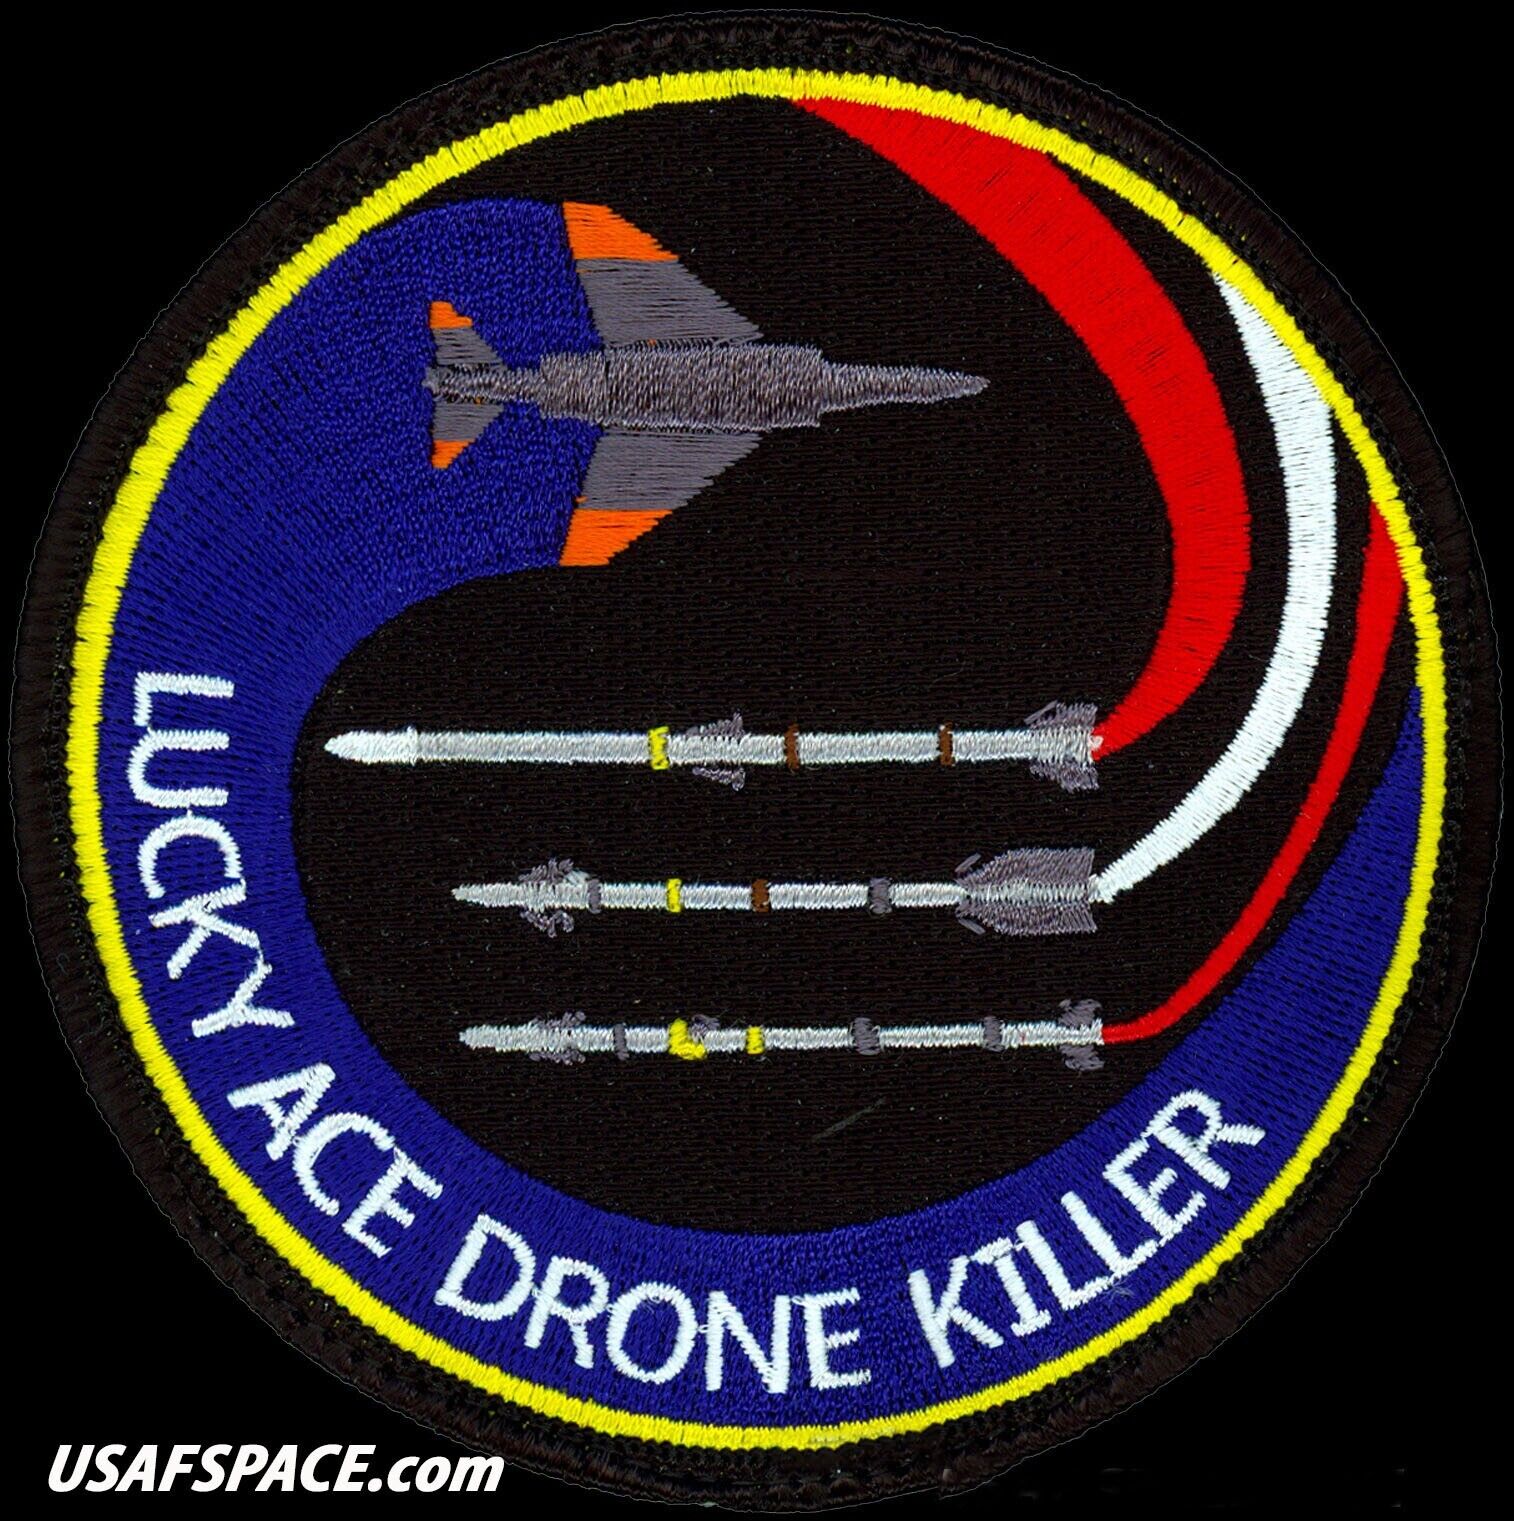 USAF 83rd FIGHTER WEAPONS SQ -LUCKY ACE DRONE KILLER-Tyndall AFB-ORIGINAL PATCH